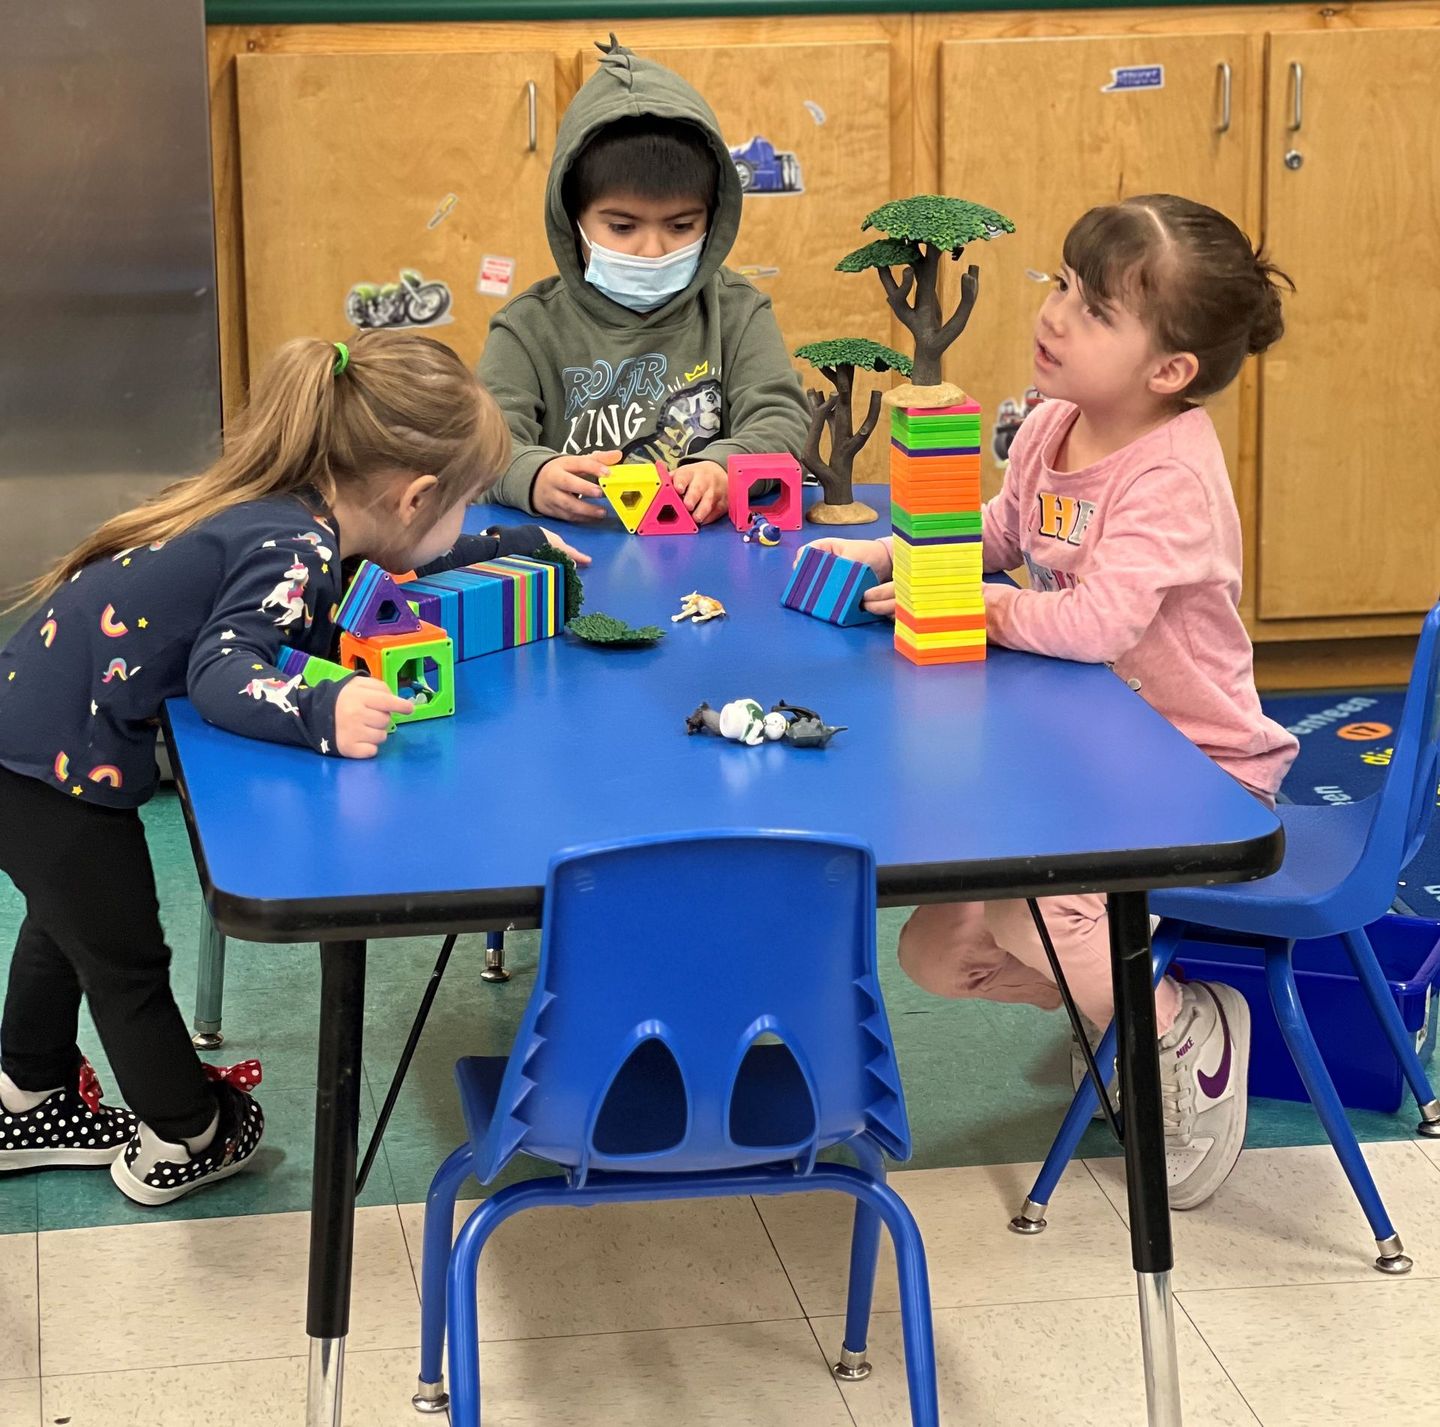 three children are playing with toys at a blue table